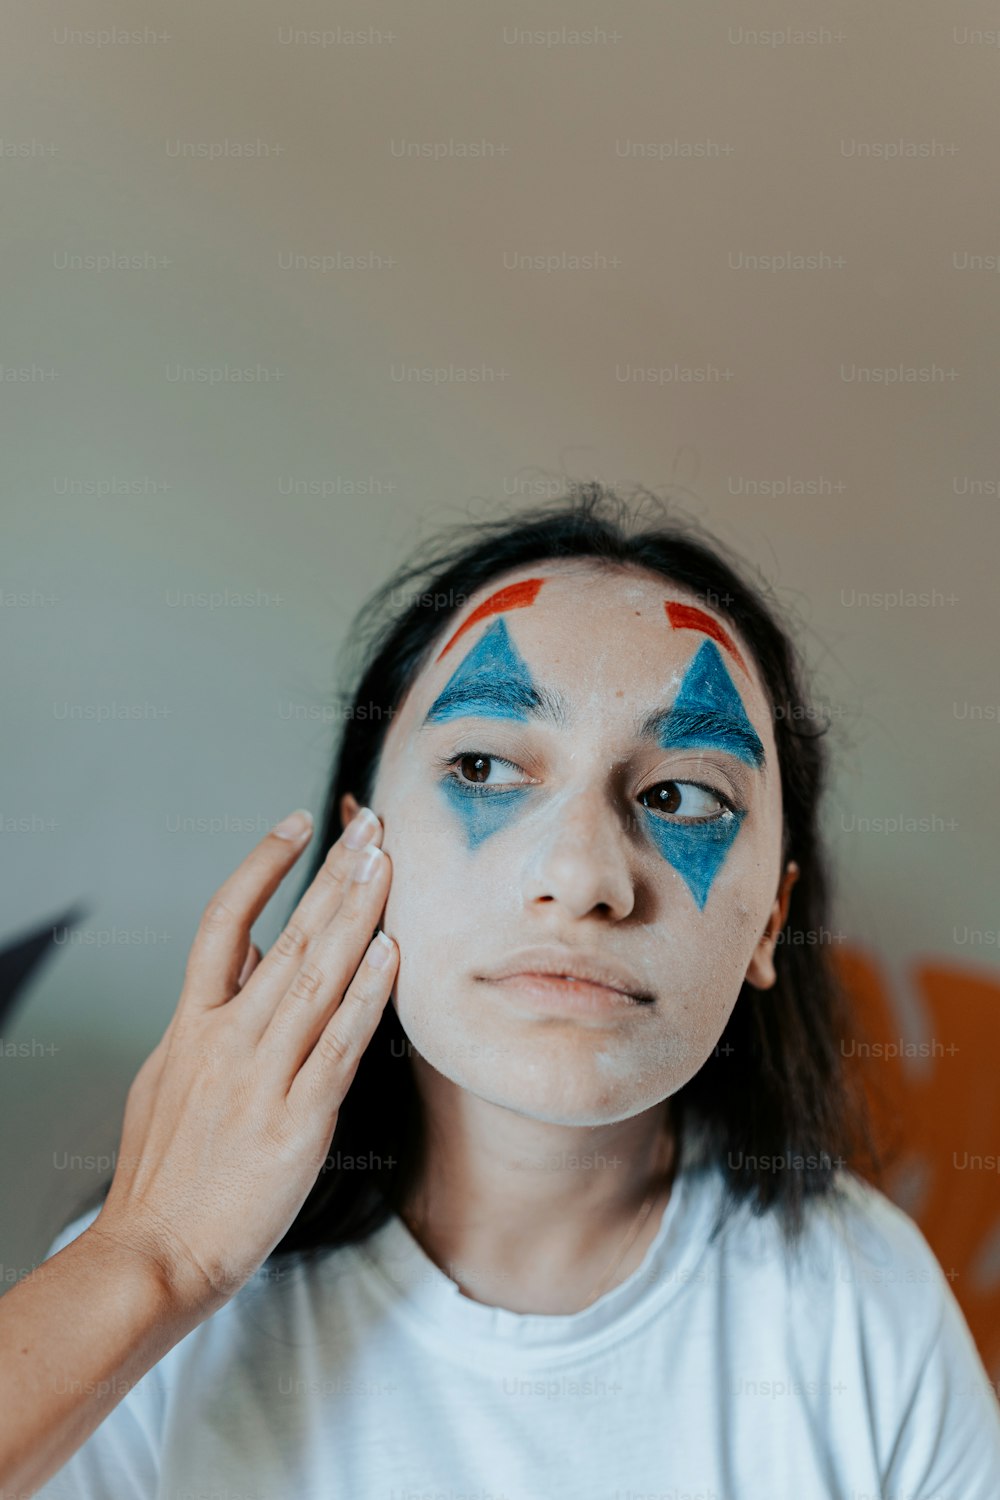 a woman with blue and red painted on her face